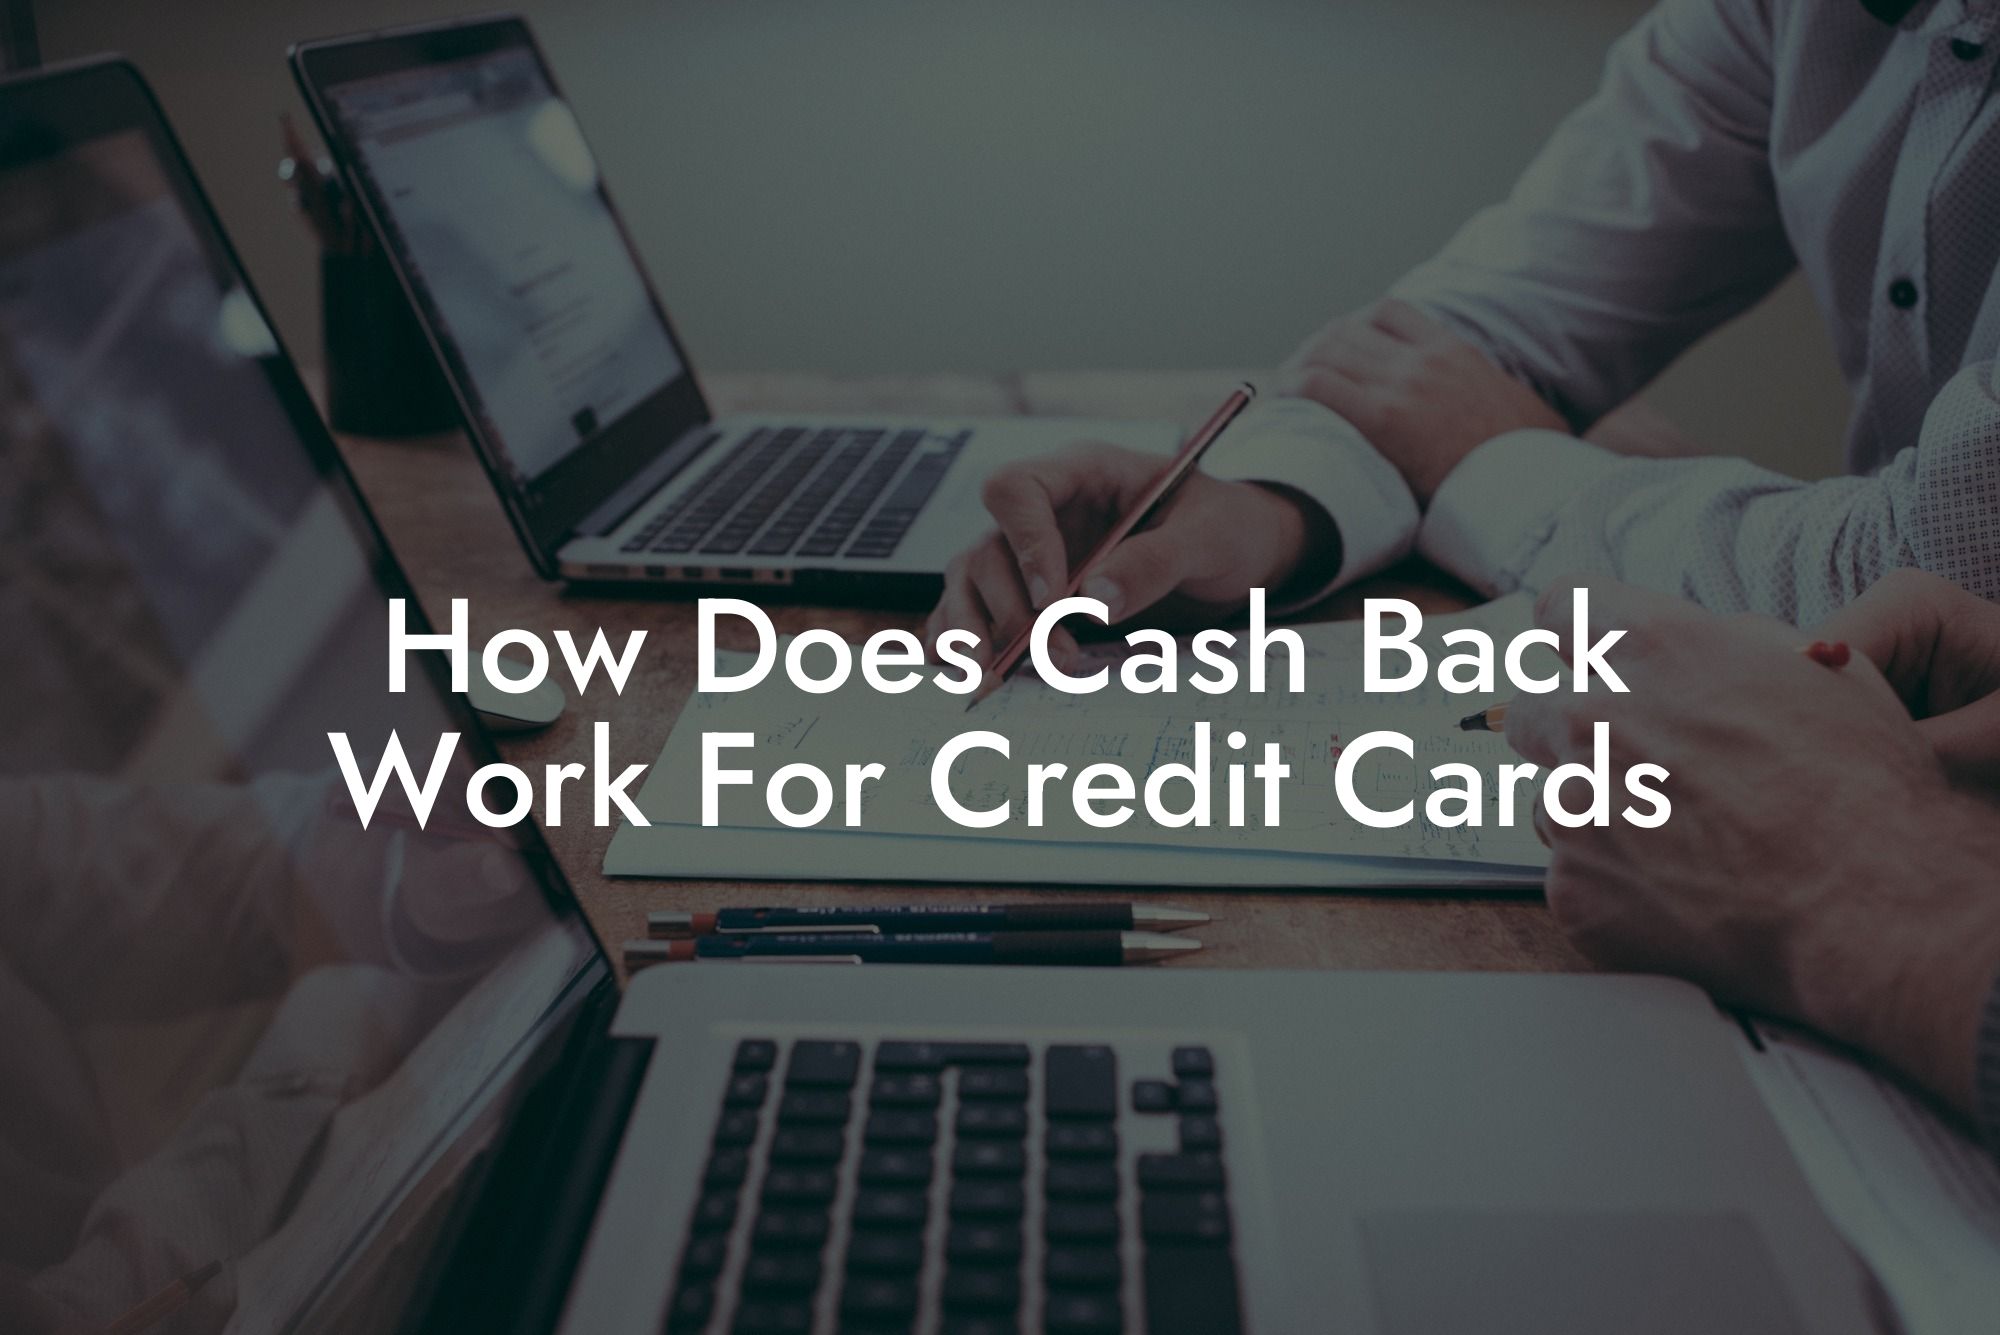 How Does Cash Back Work For Credit Cards